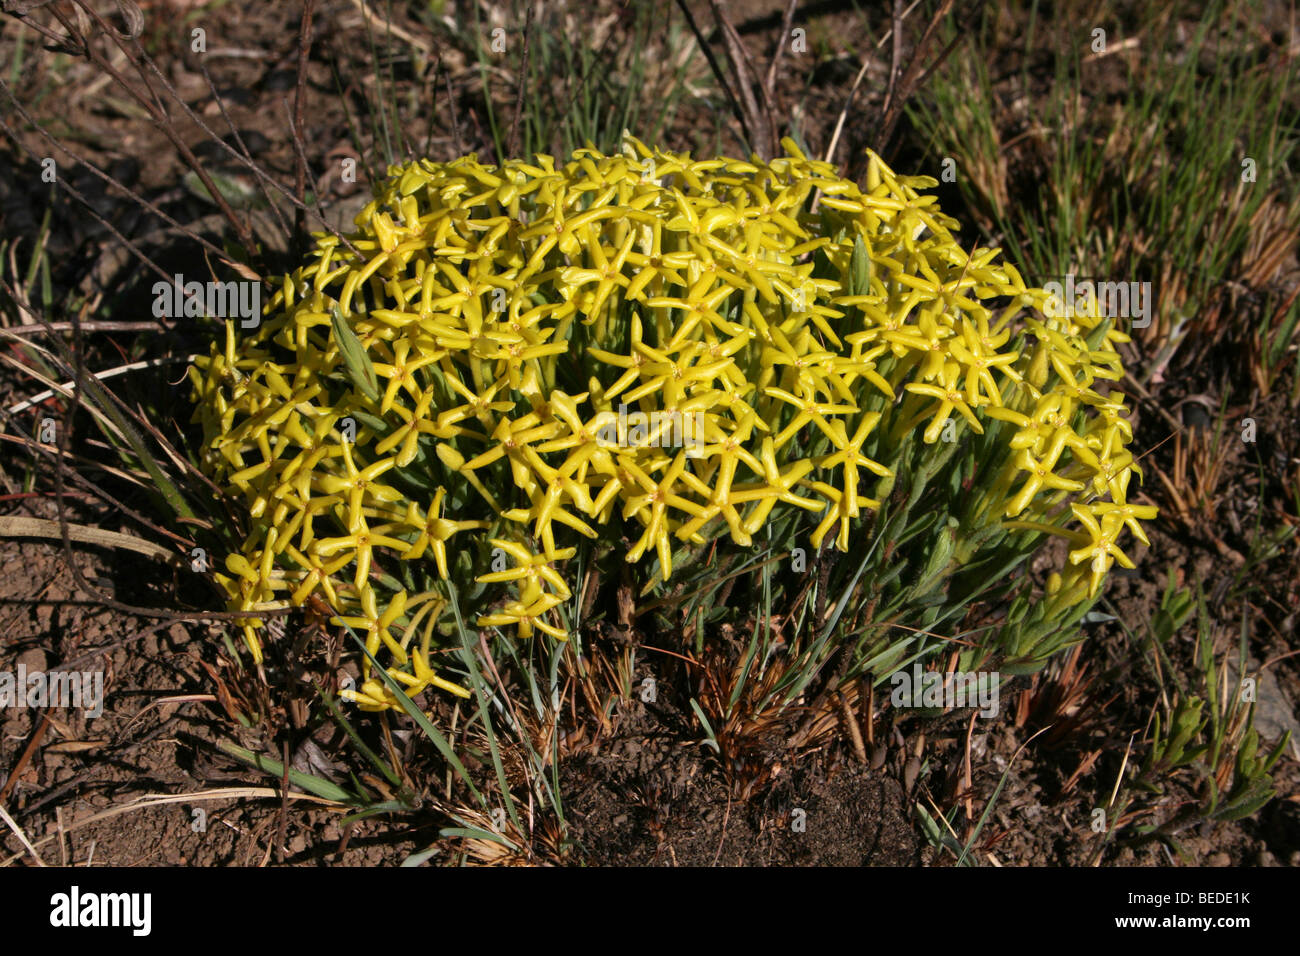 Clump of Yellow Flowers Of Gnidia caffra Taken In Malolotja National Park Swaziland Stock Photo